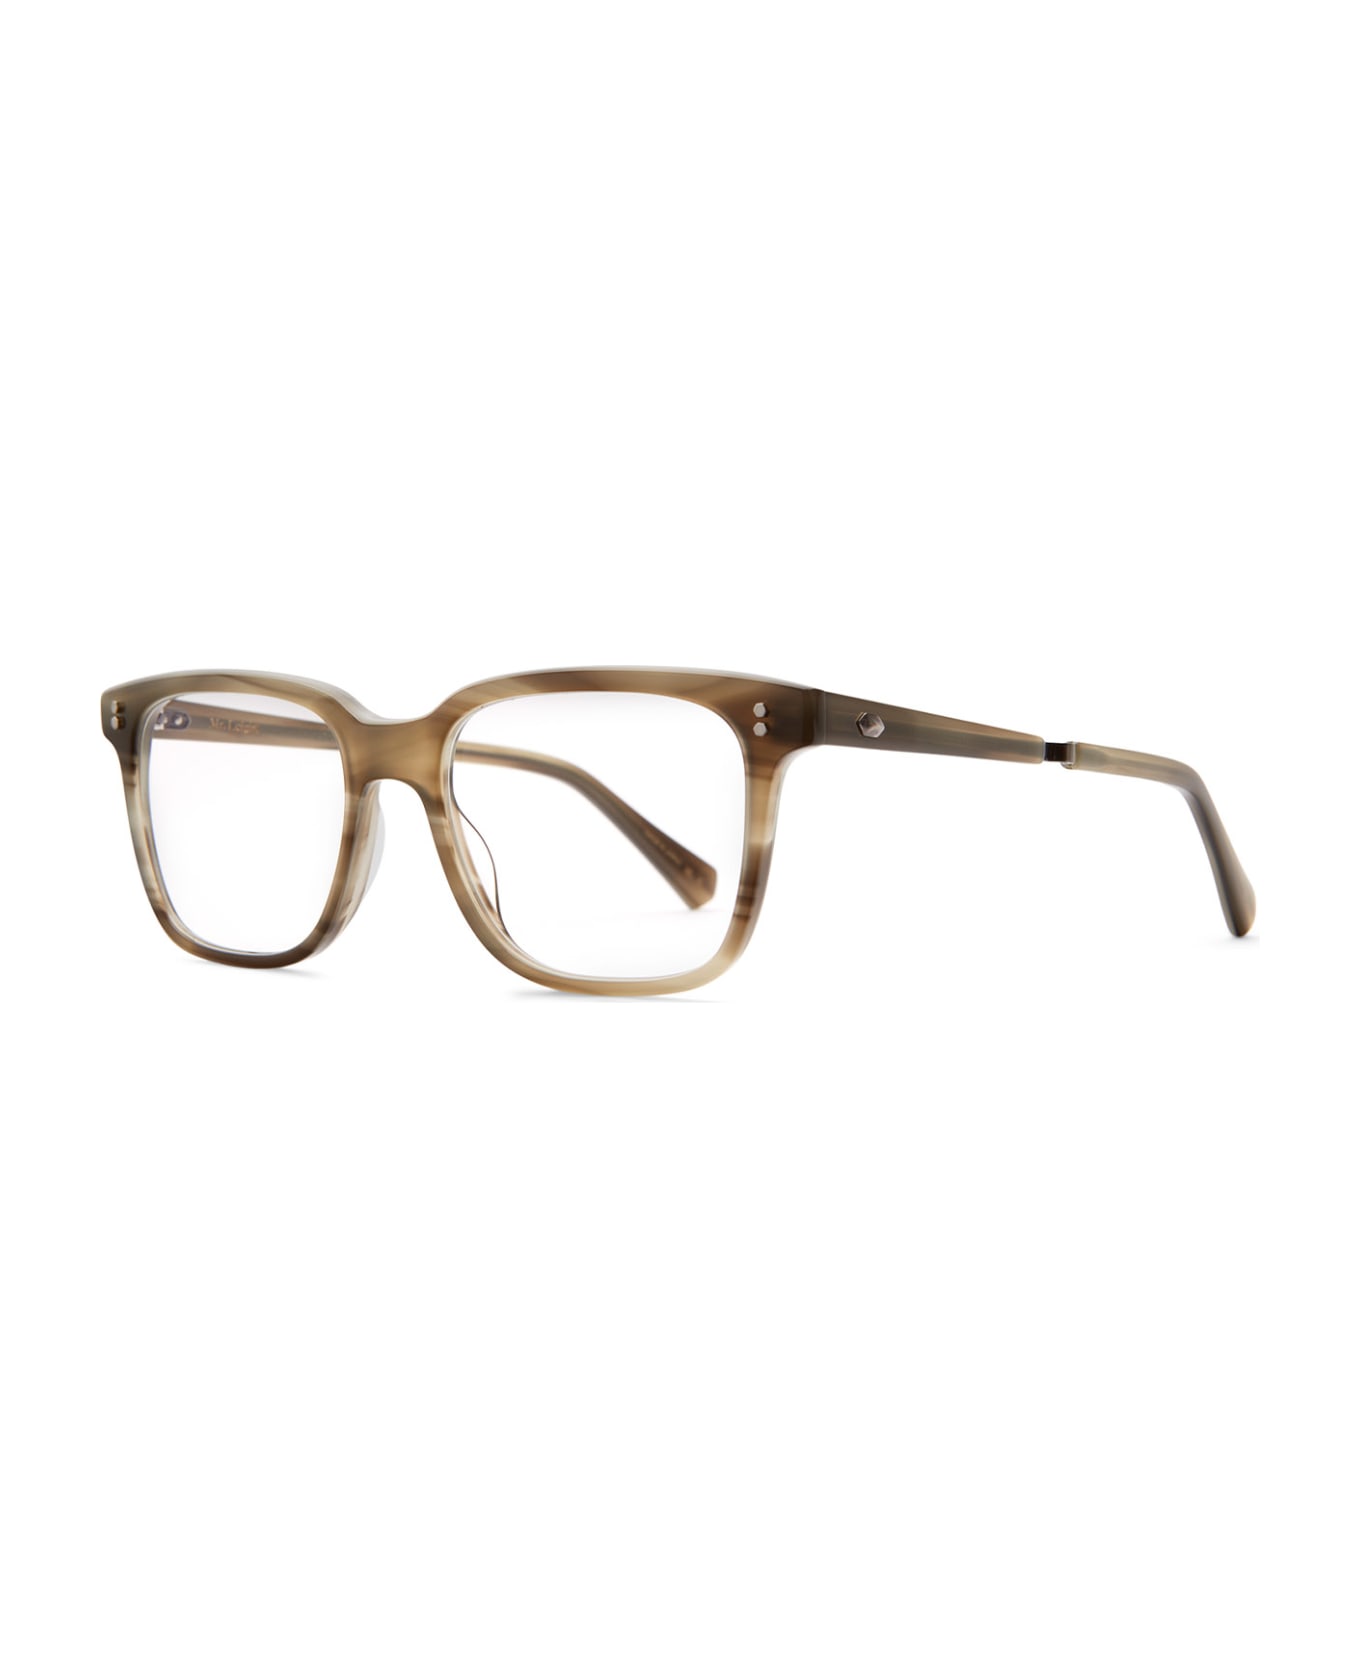 Mr. Leight Lautner C Sycamore-pewter Glasses - Sycamore-Pewter